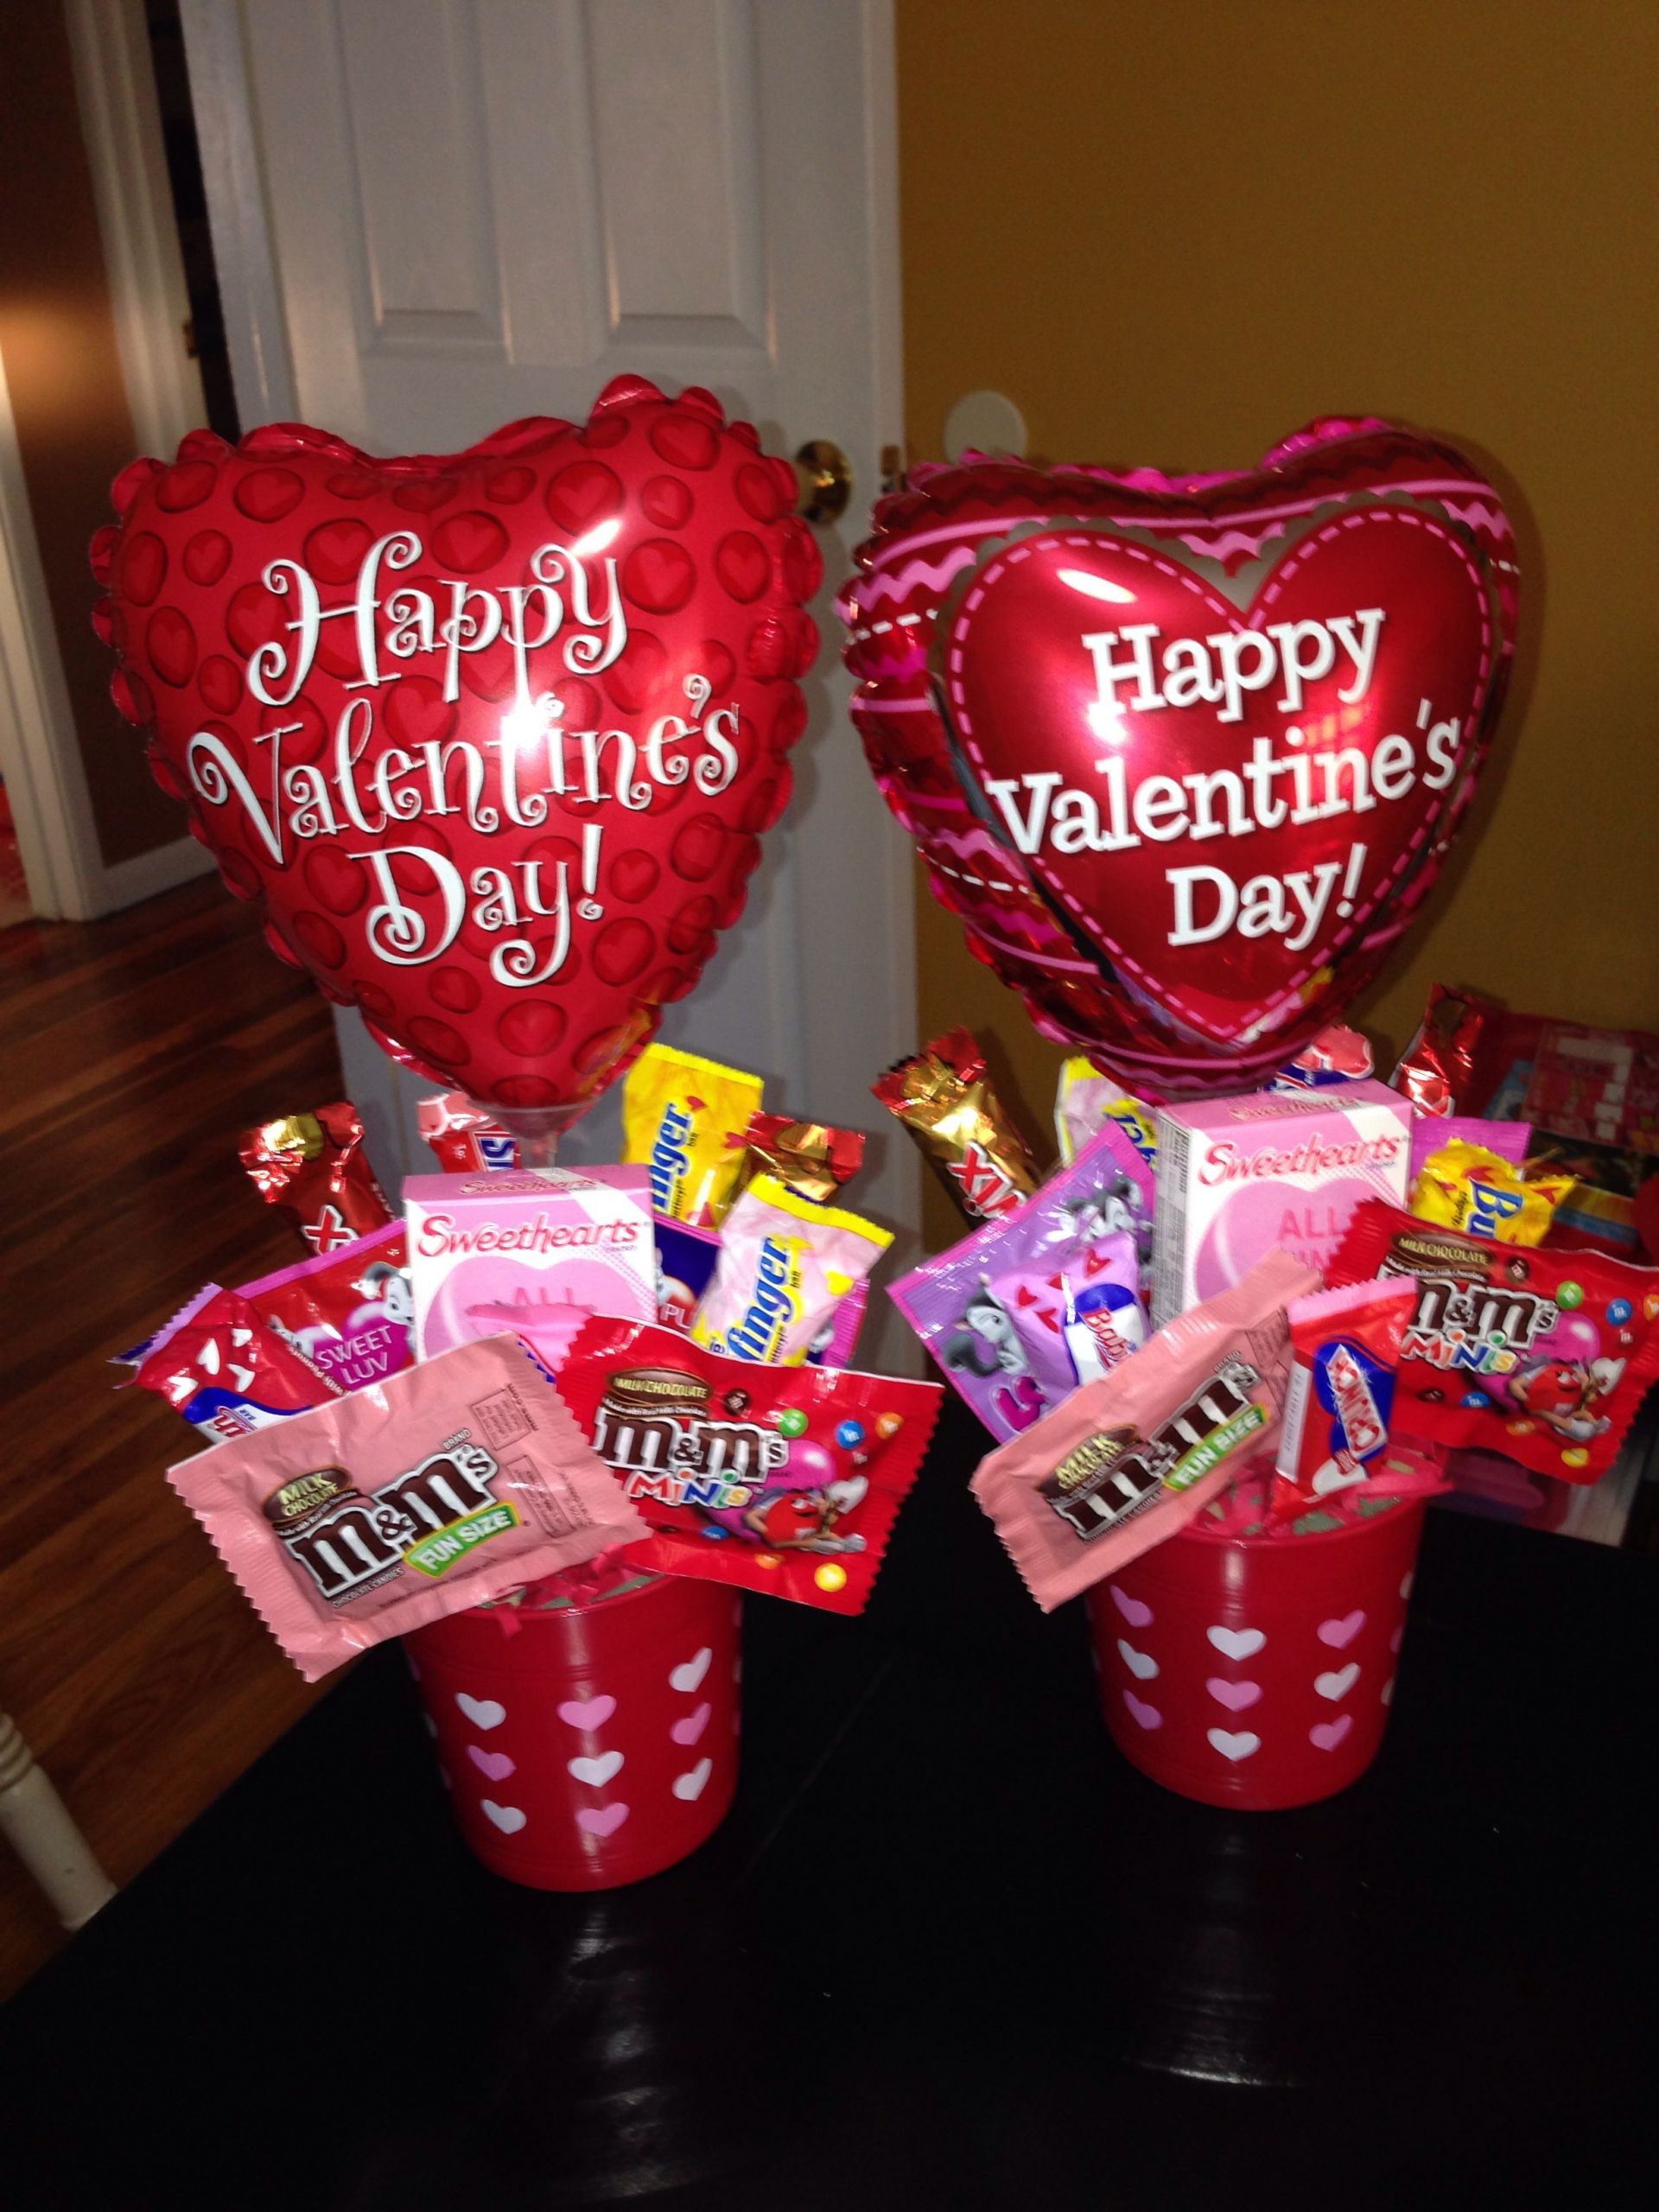 Valentine'S Day Gift Delivery Ideas
 Pin on Candy bouquets